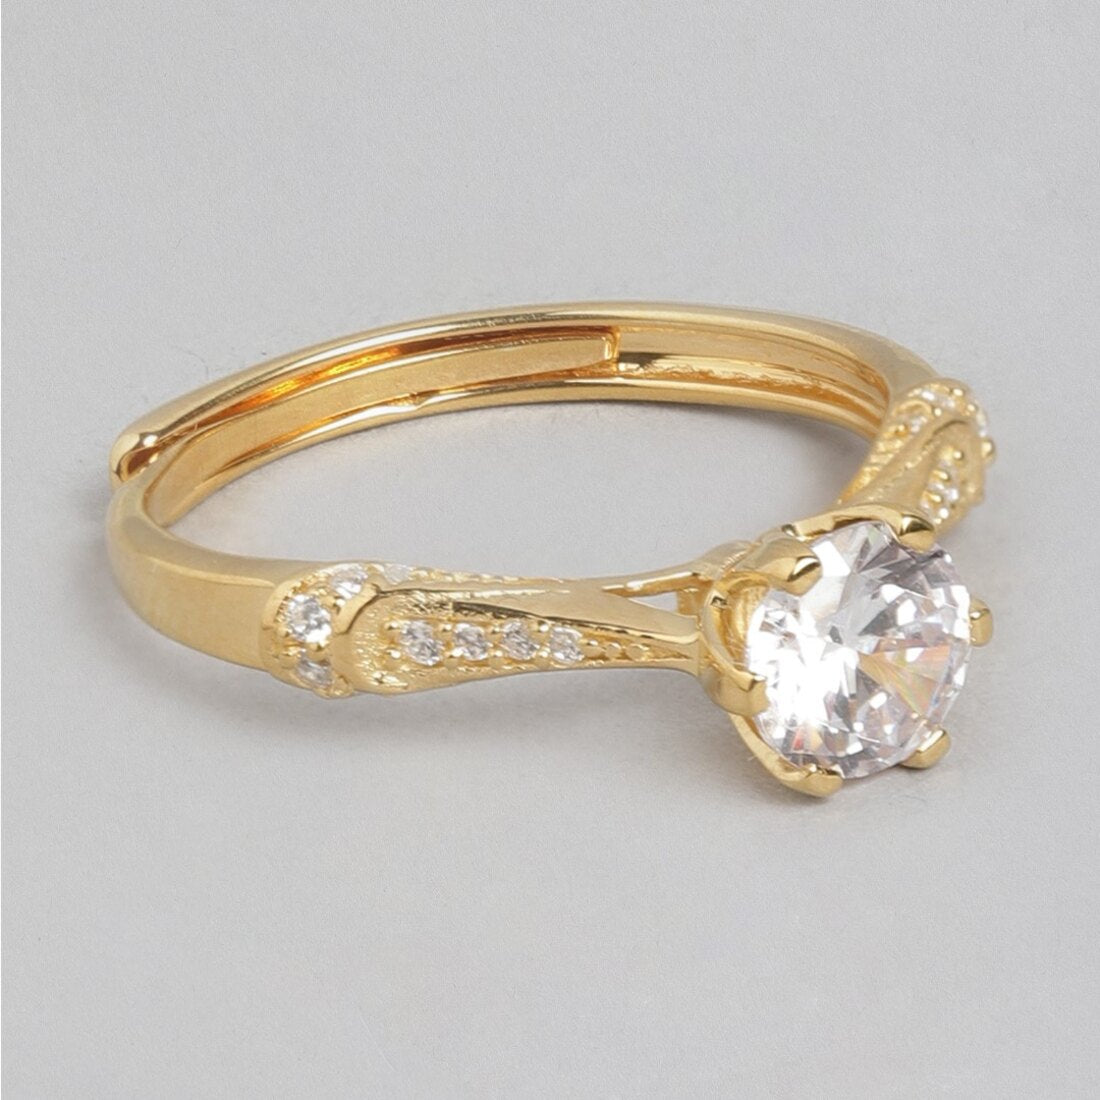 Golden Elegance Solitaire Gold-Plated 925 Sterling Silver Combo Ring